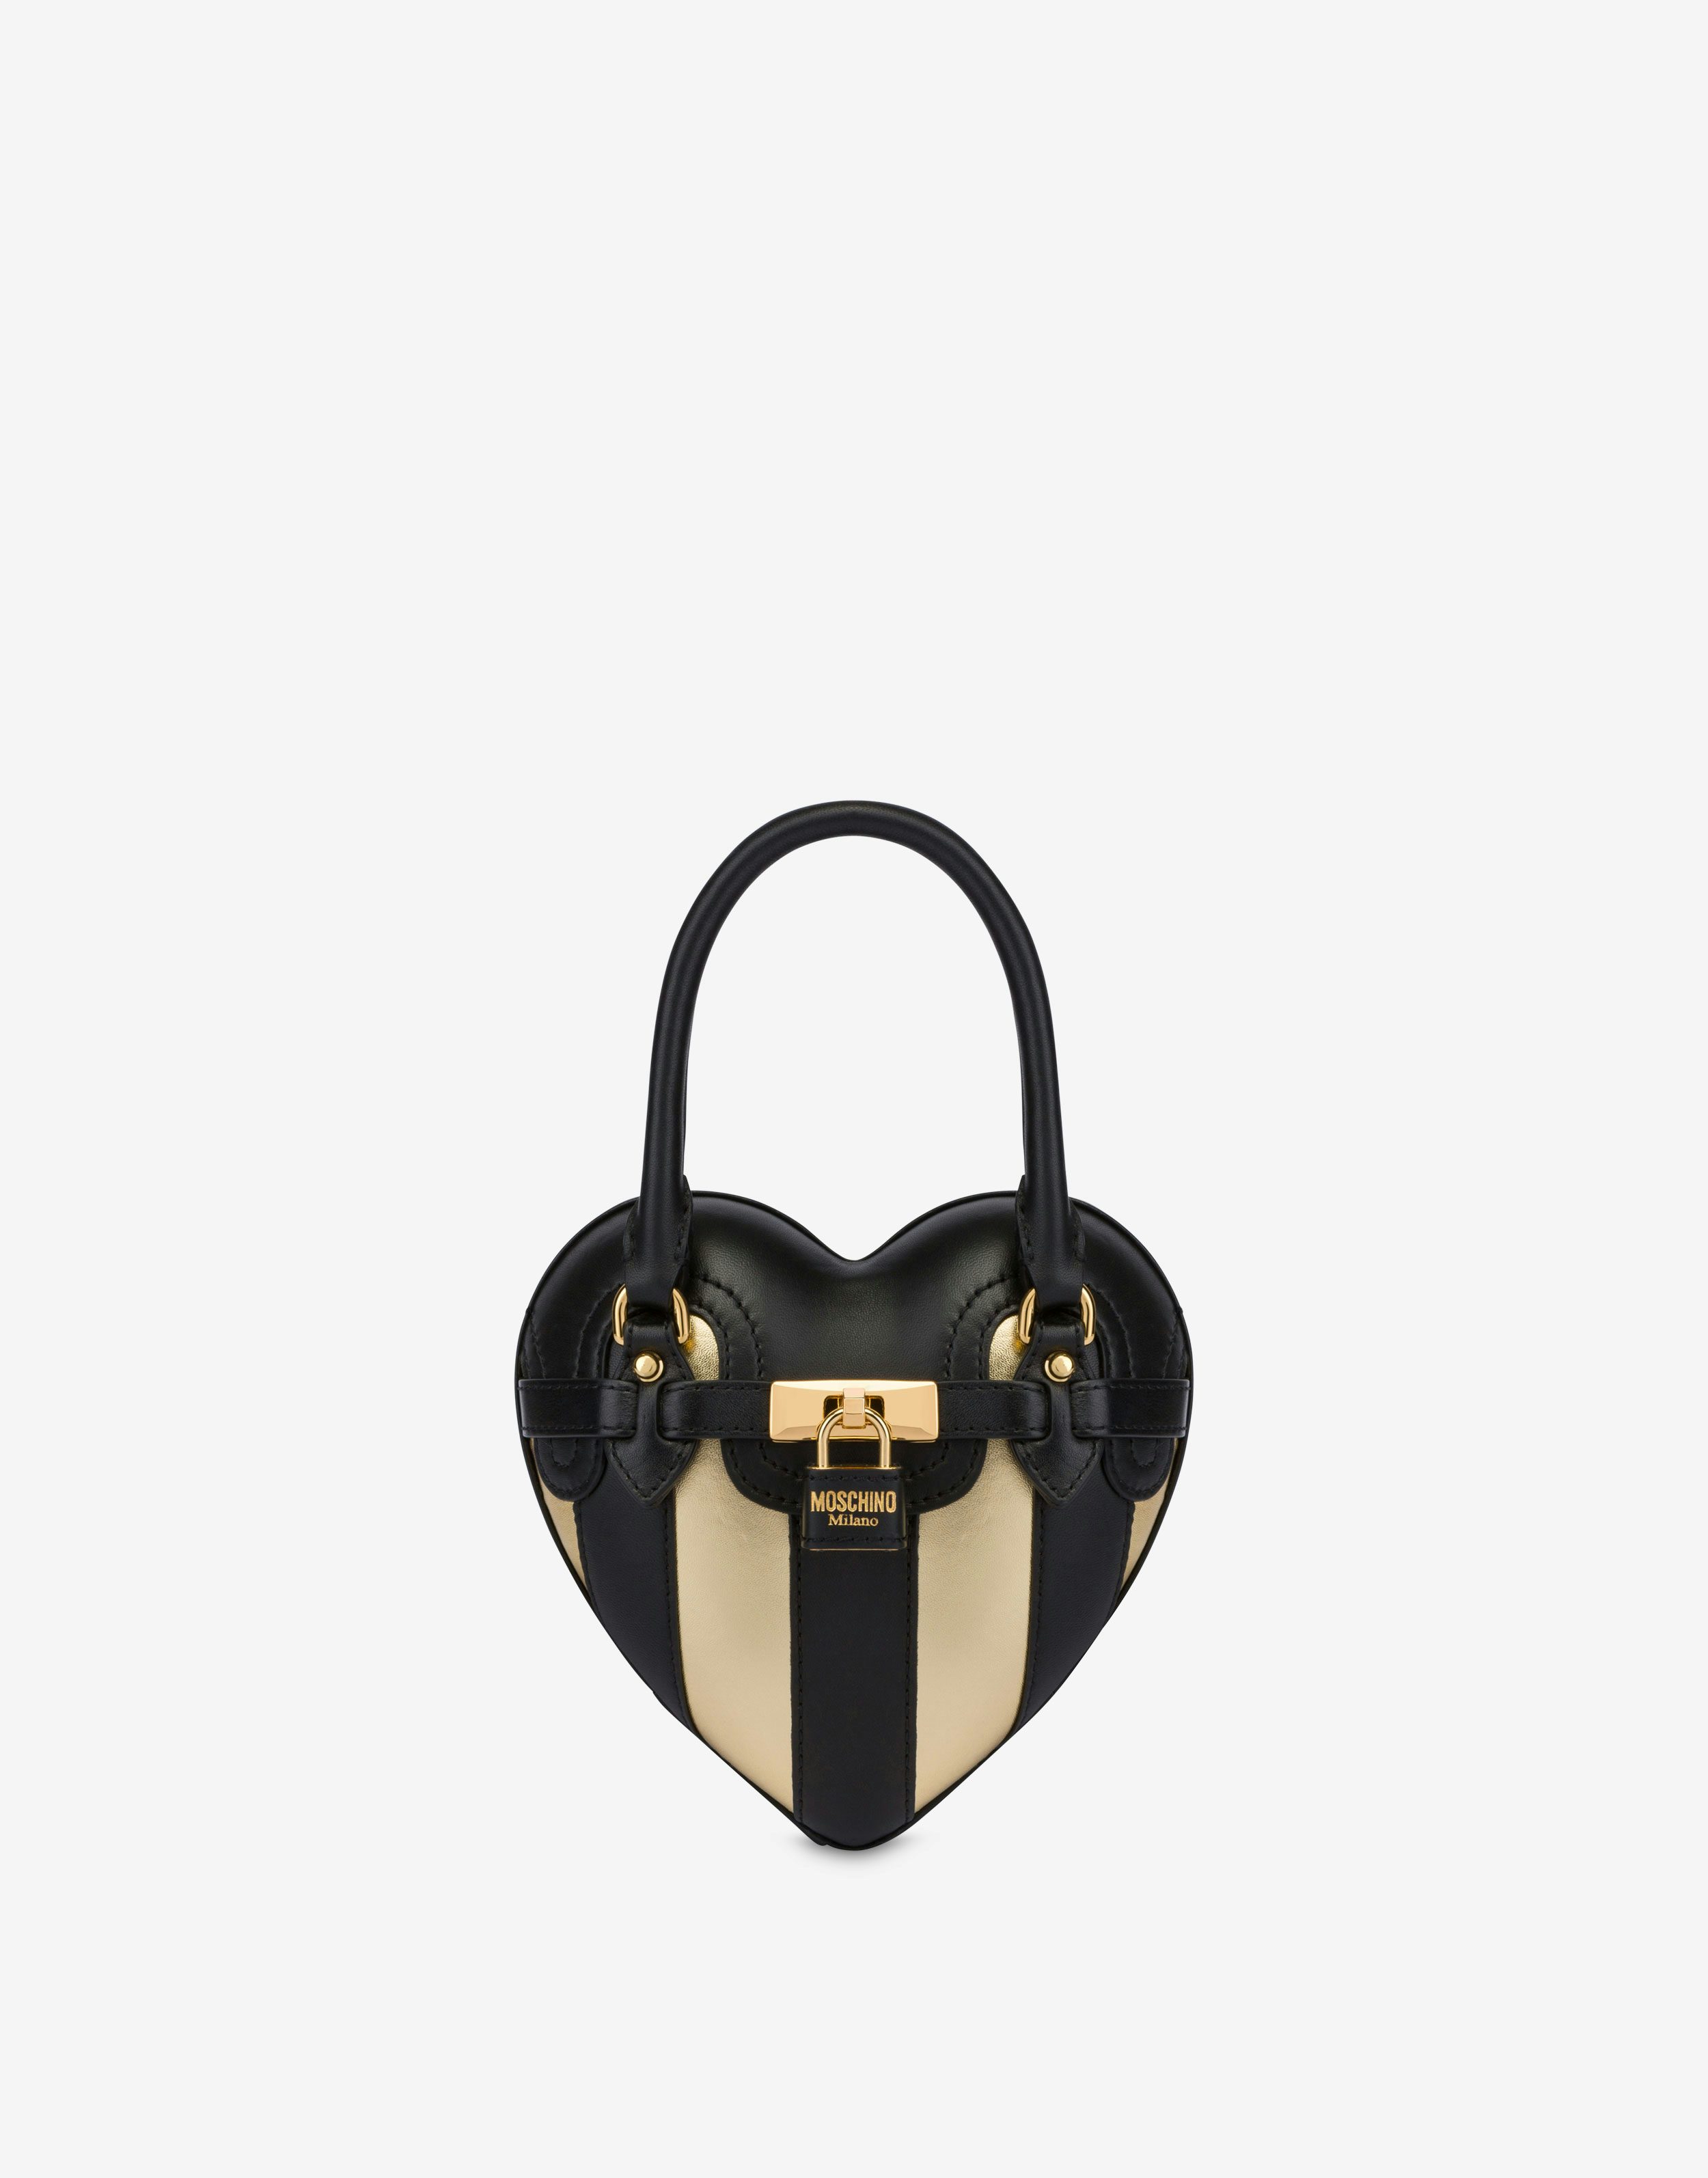 Moschino Heartbeat bag Stripes Patchwork